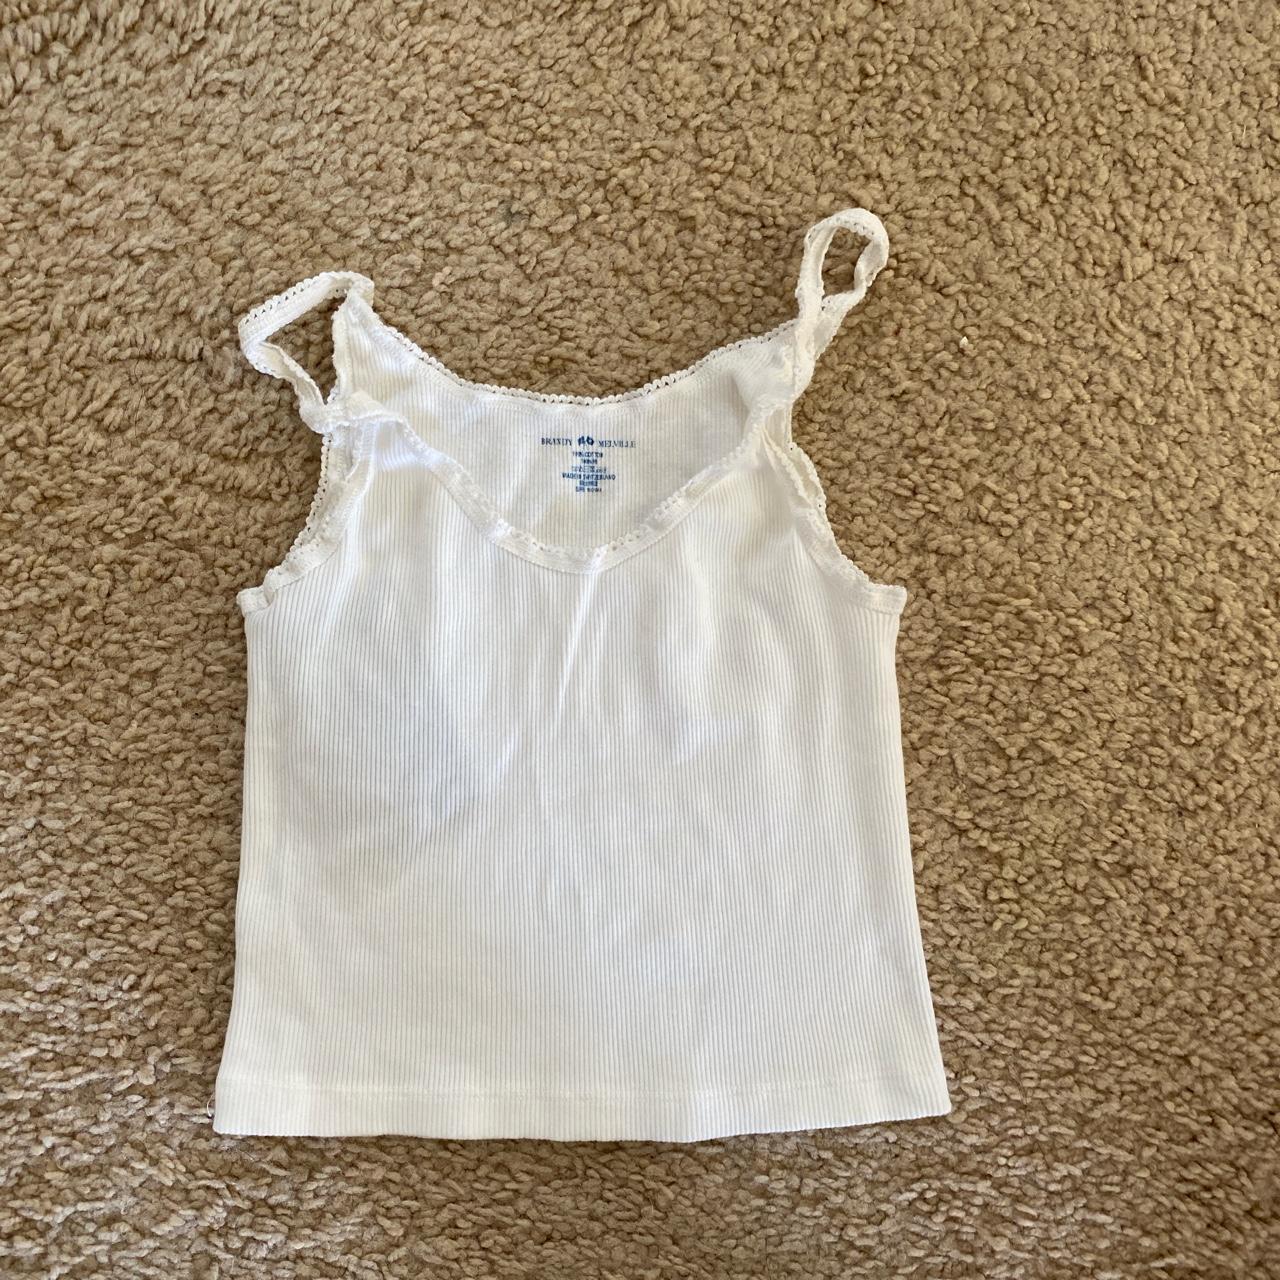 White lace tank from Brandy Melville This lovely - Depop